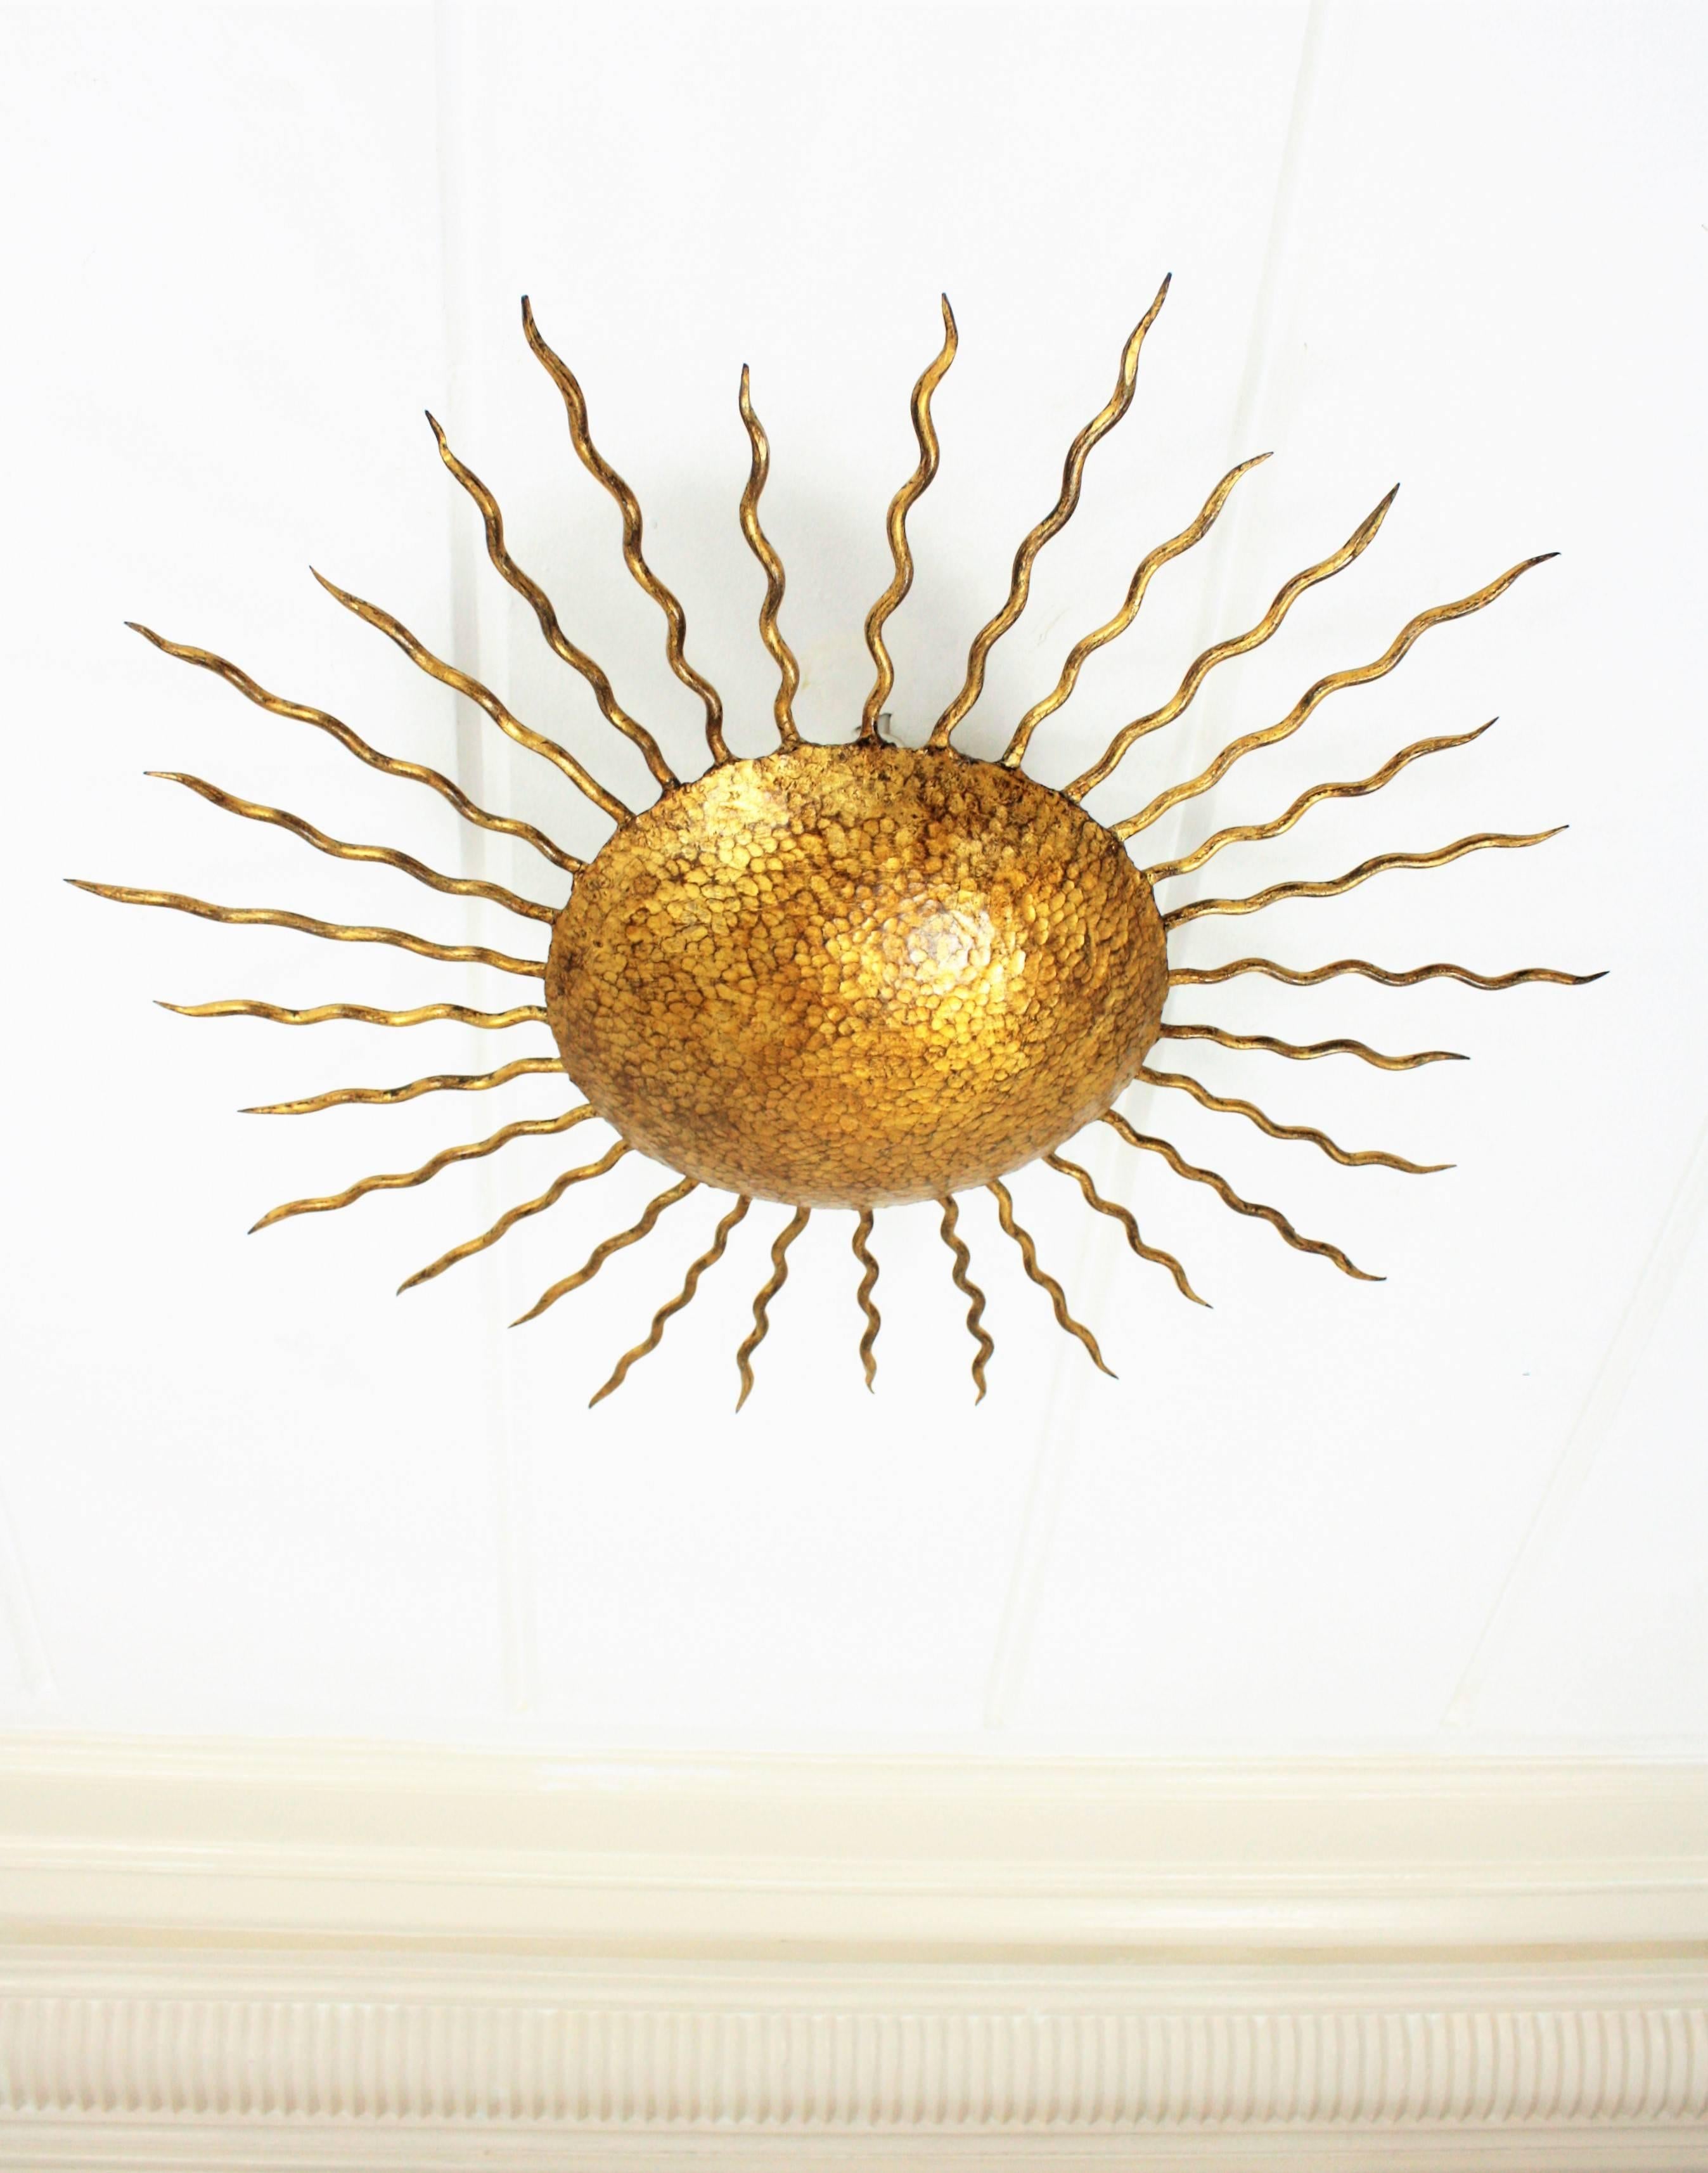 Gold leaf gilt iron sunburst light fixture from the Brutalist period. Richly decorated in the center part with hand-hammered marks. Beautiful to place as ceiling light fixture but also as a wall sconce, Spain, 1950s.
Avaliable more pieces in this